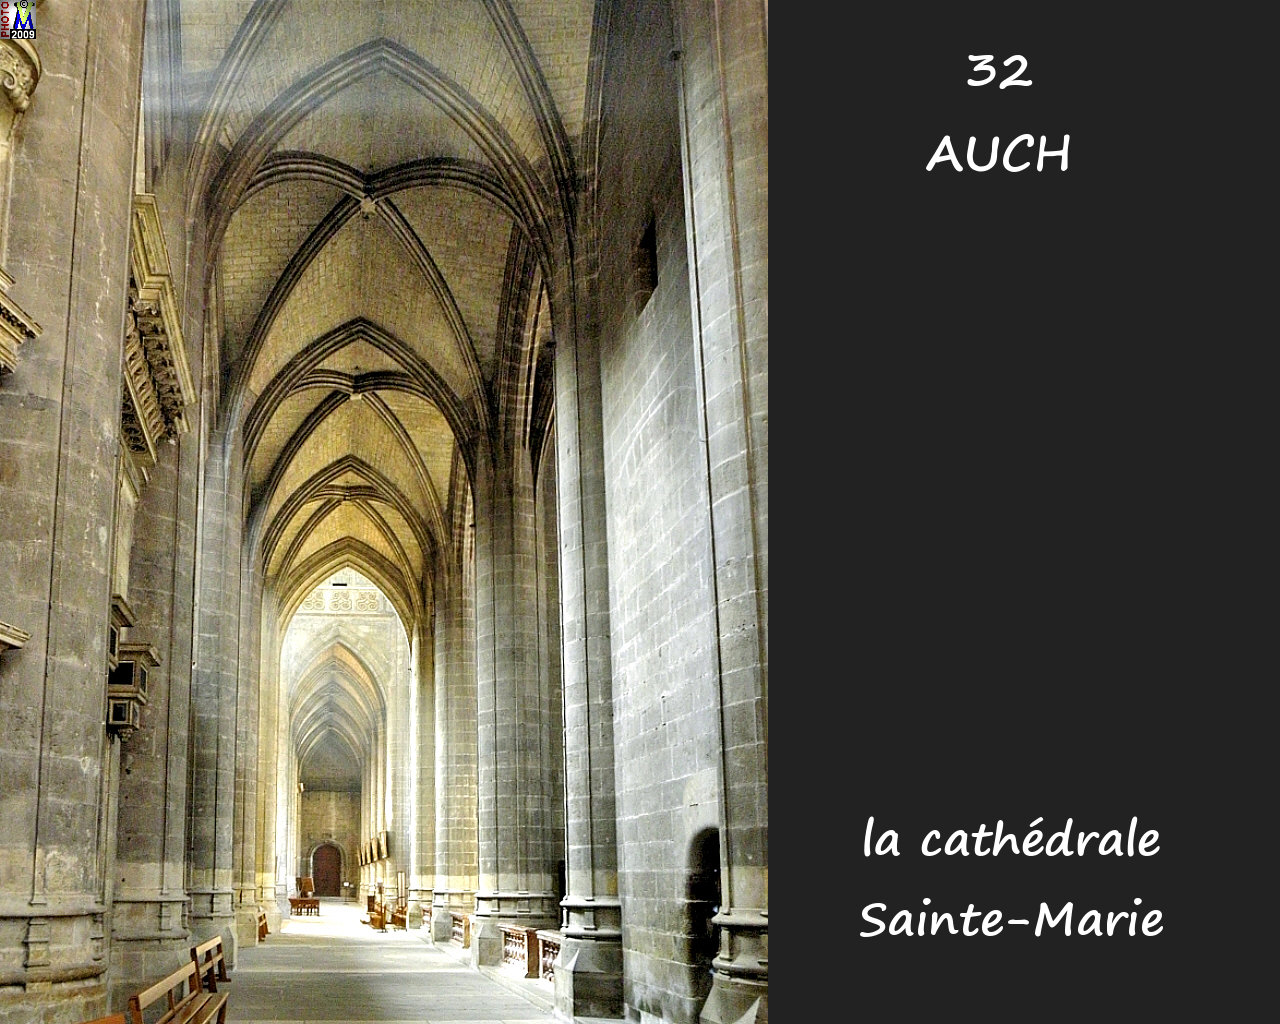 32AUCH_cathedrale_206.jpg